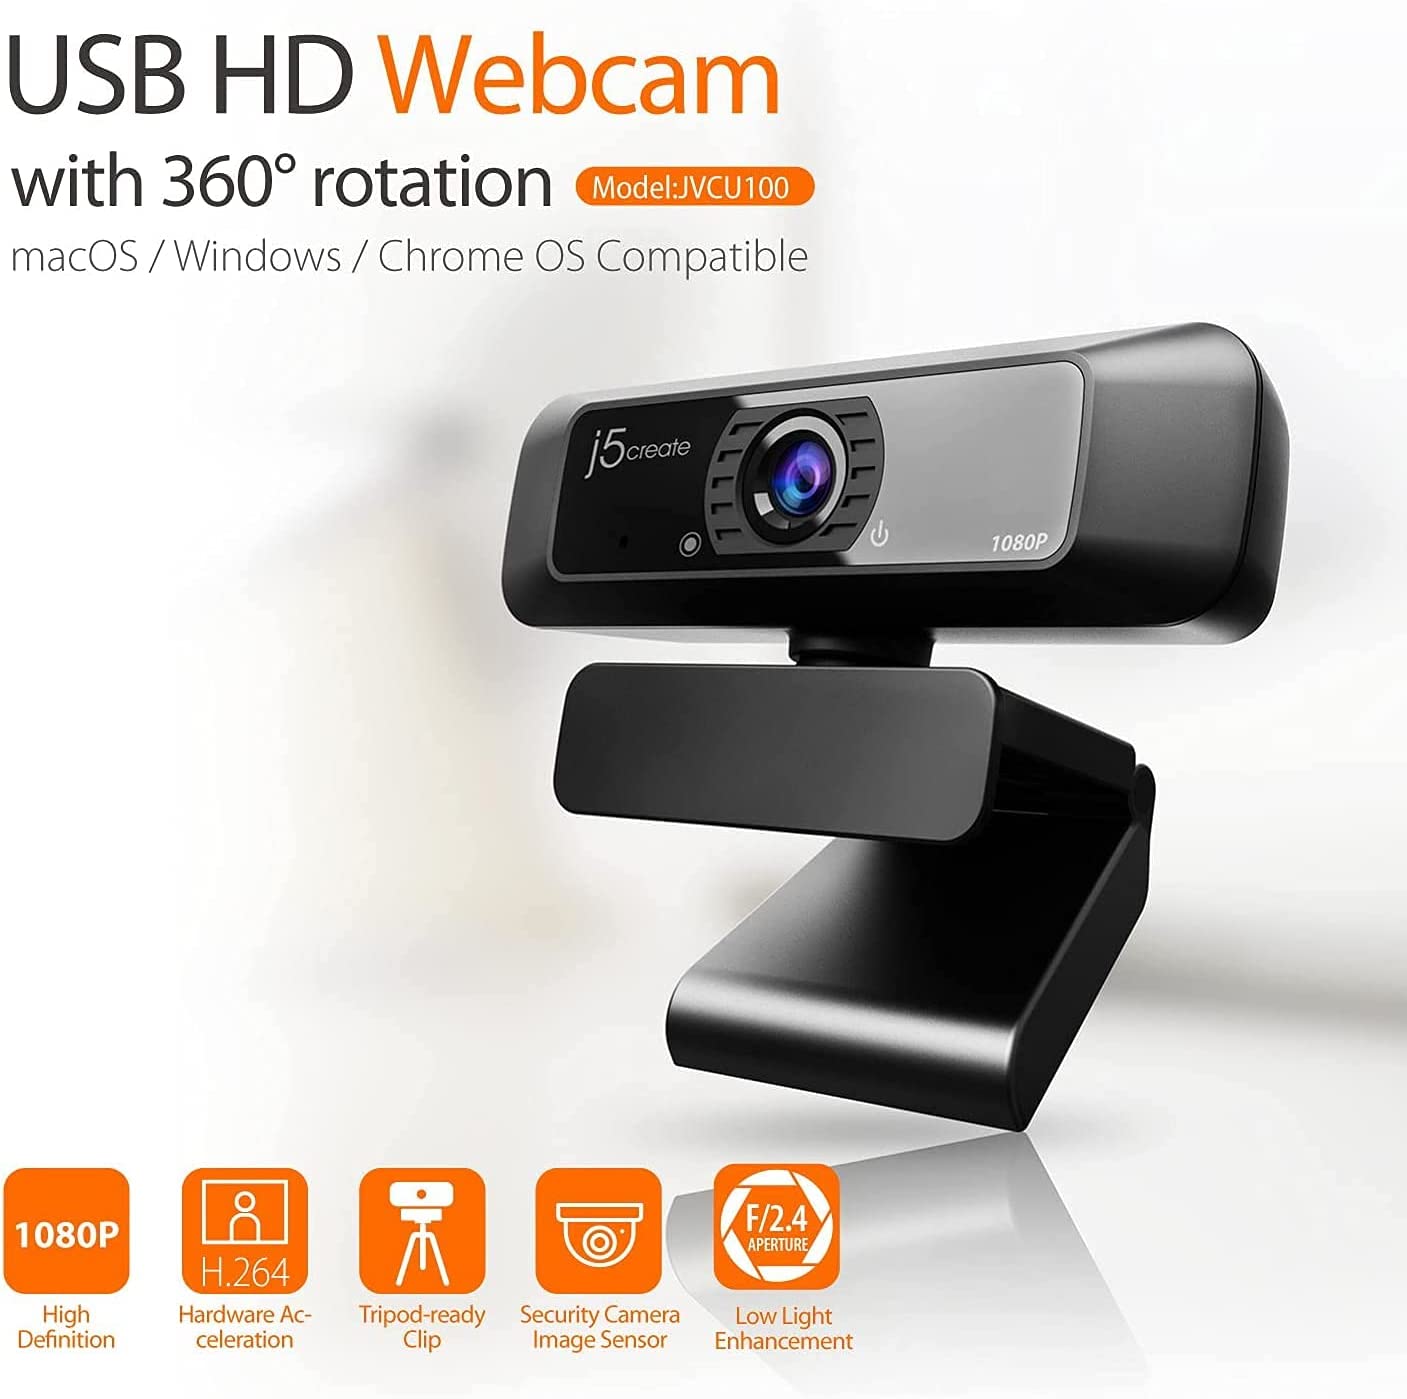 J5create Usb Hd Web Cam with 360 Degree Rotation | Color Black | Best Computer Accessories in Bahrain | Halabh